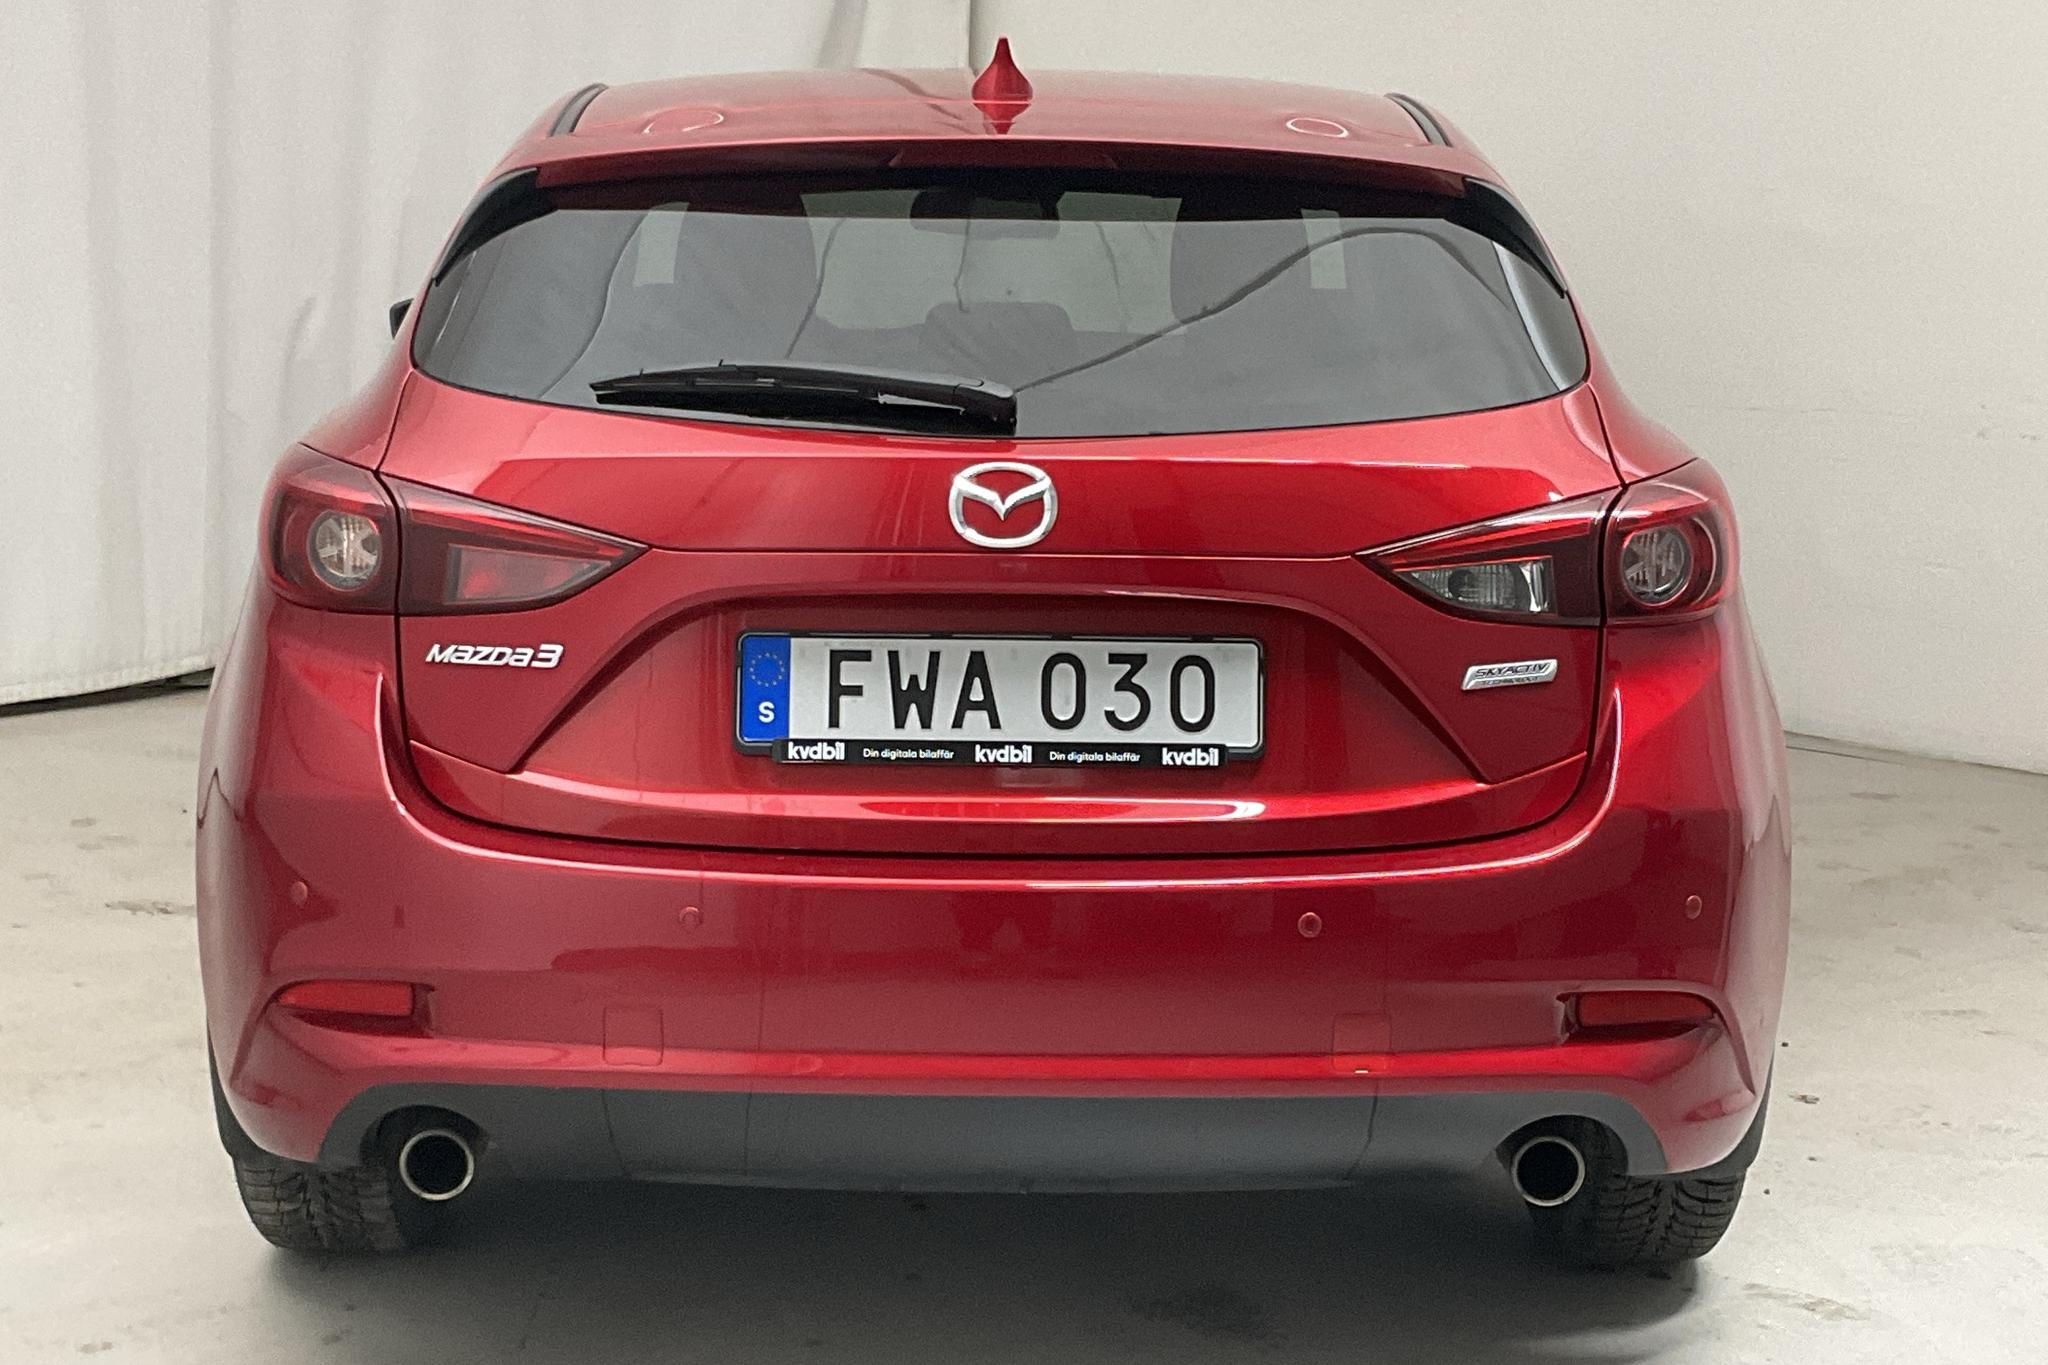 Mazda 3 2.0 5dr (120hk) - 69 820 km - Automatic - red - 2018